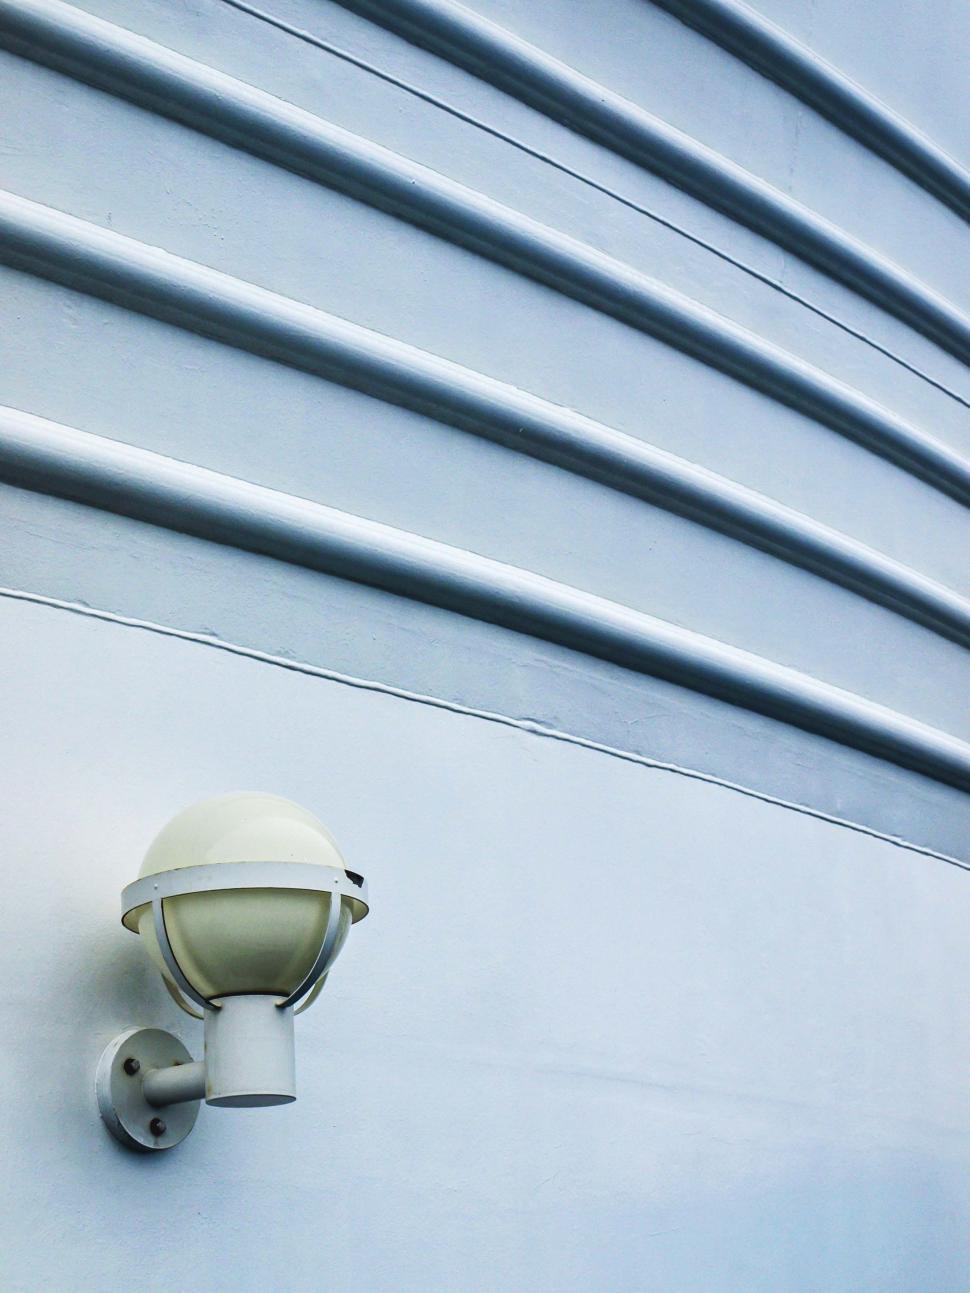 Free Image of Modern wall with security camera attached 